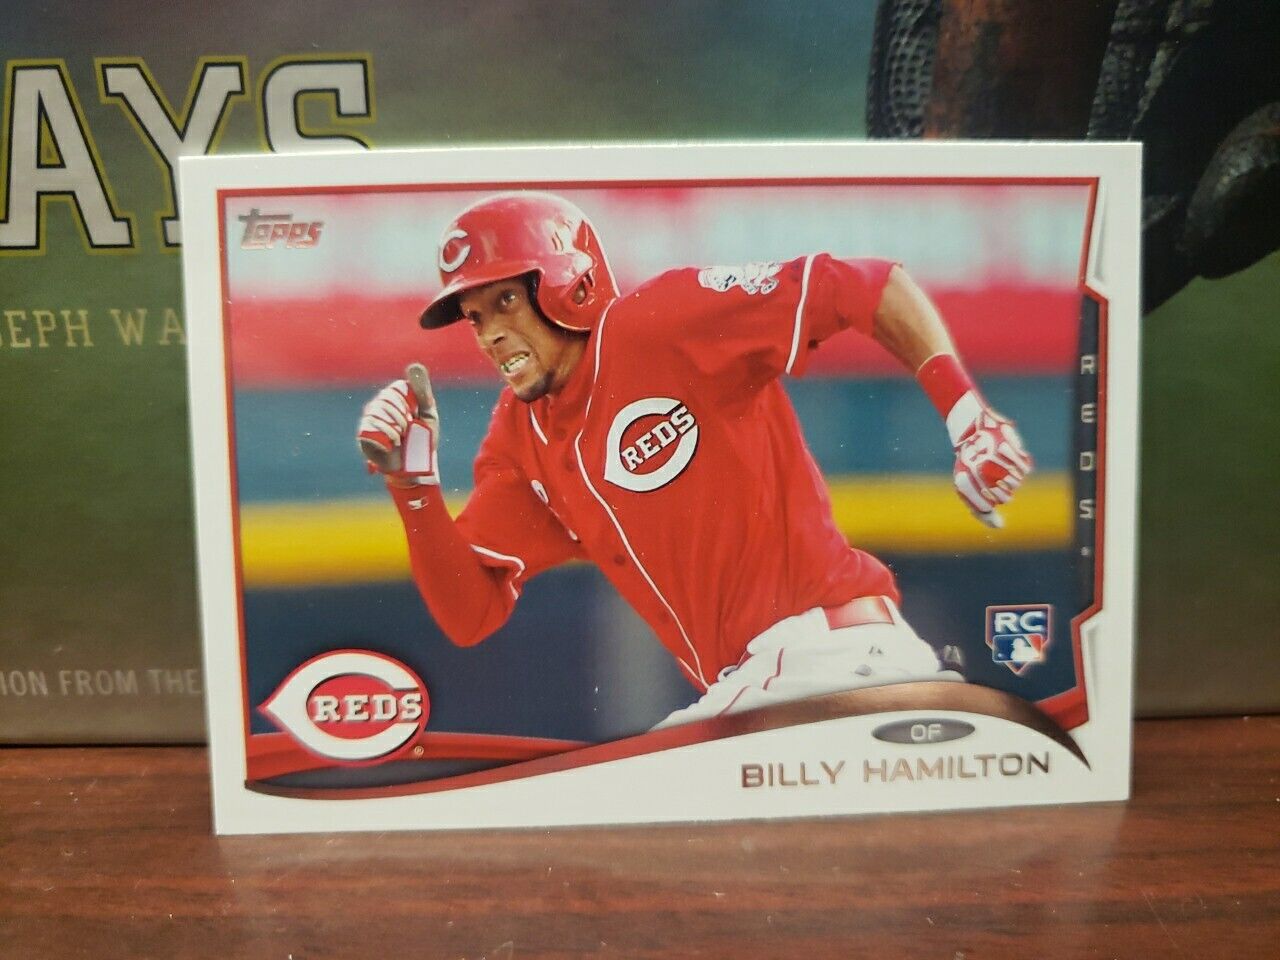 2014 Topps Billy Hamilton #36 RC Reds Rookie